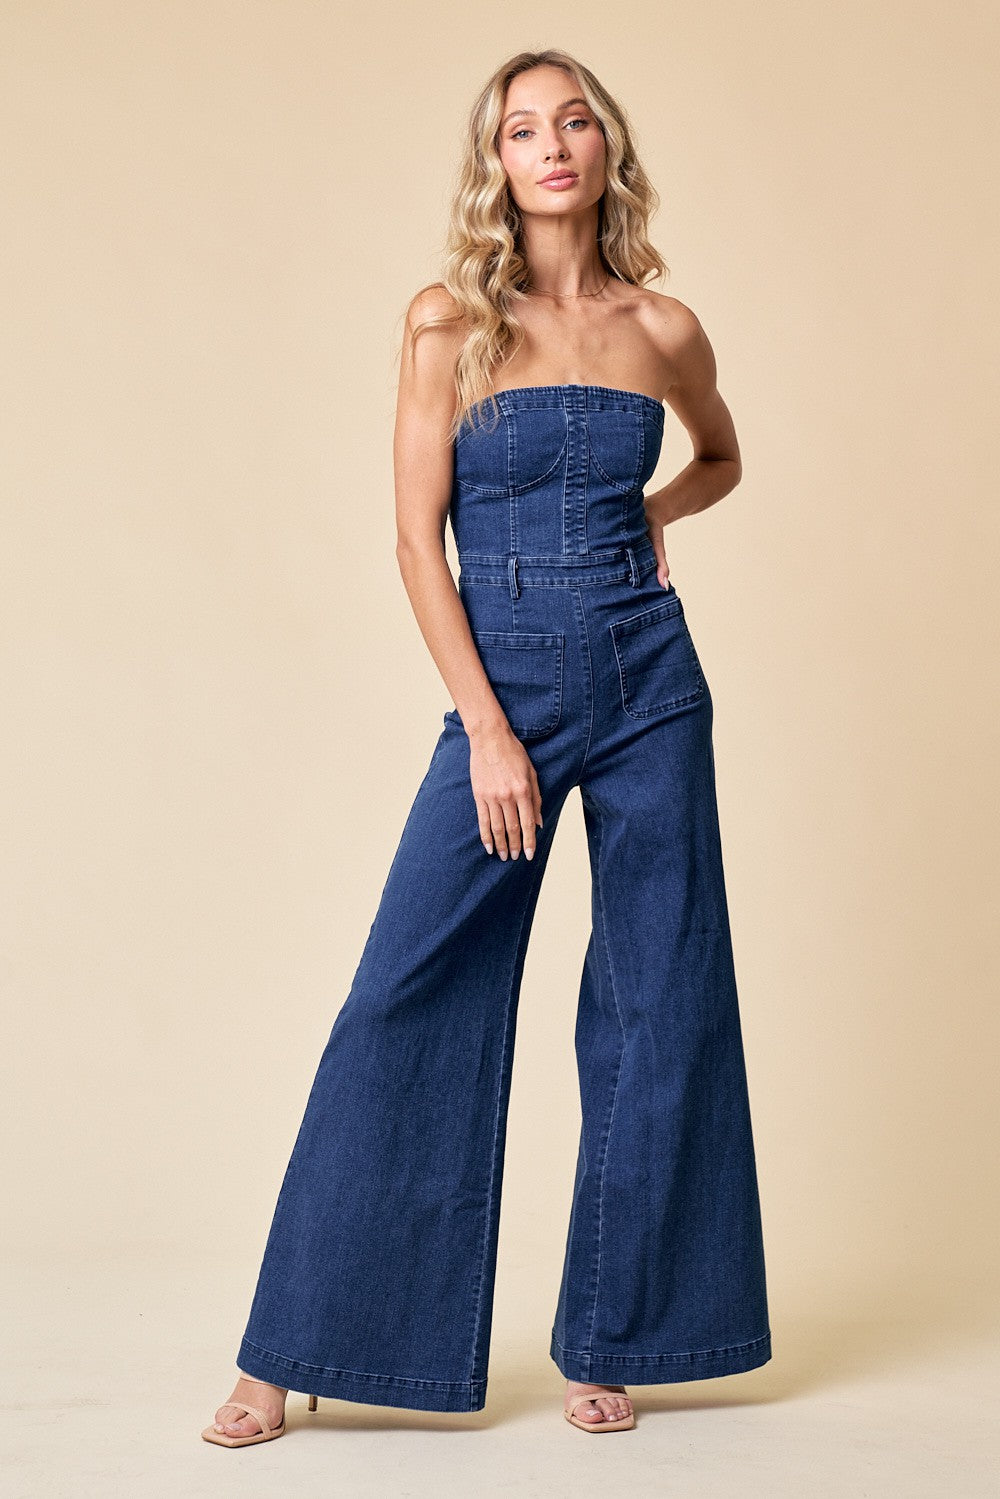 TUBE TOP DENIM JUMPSUIT WITH POCKETS AVAILABLE